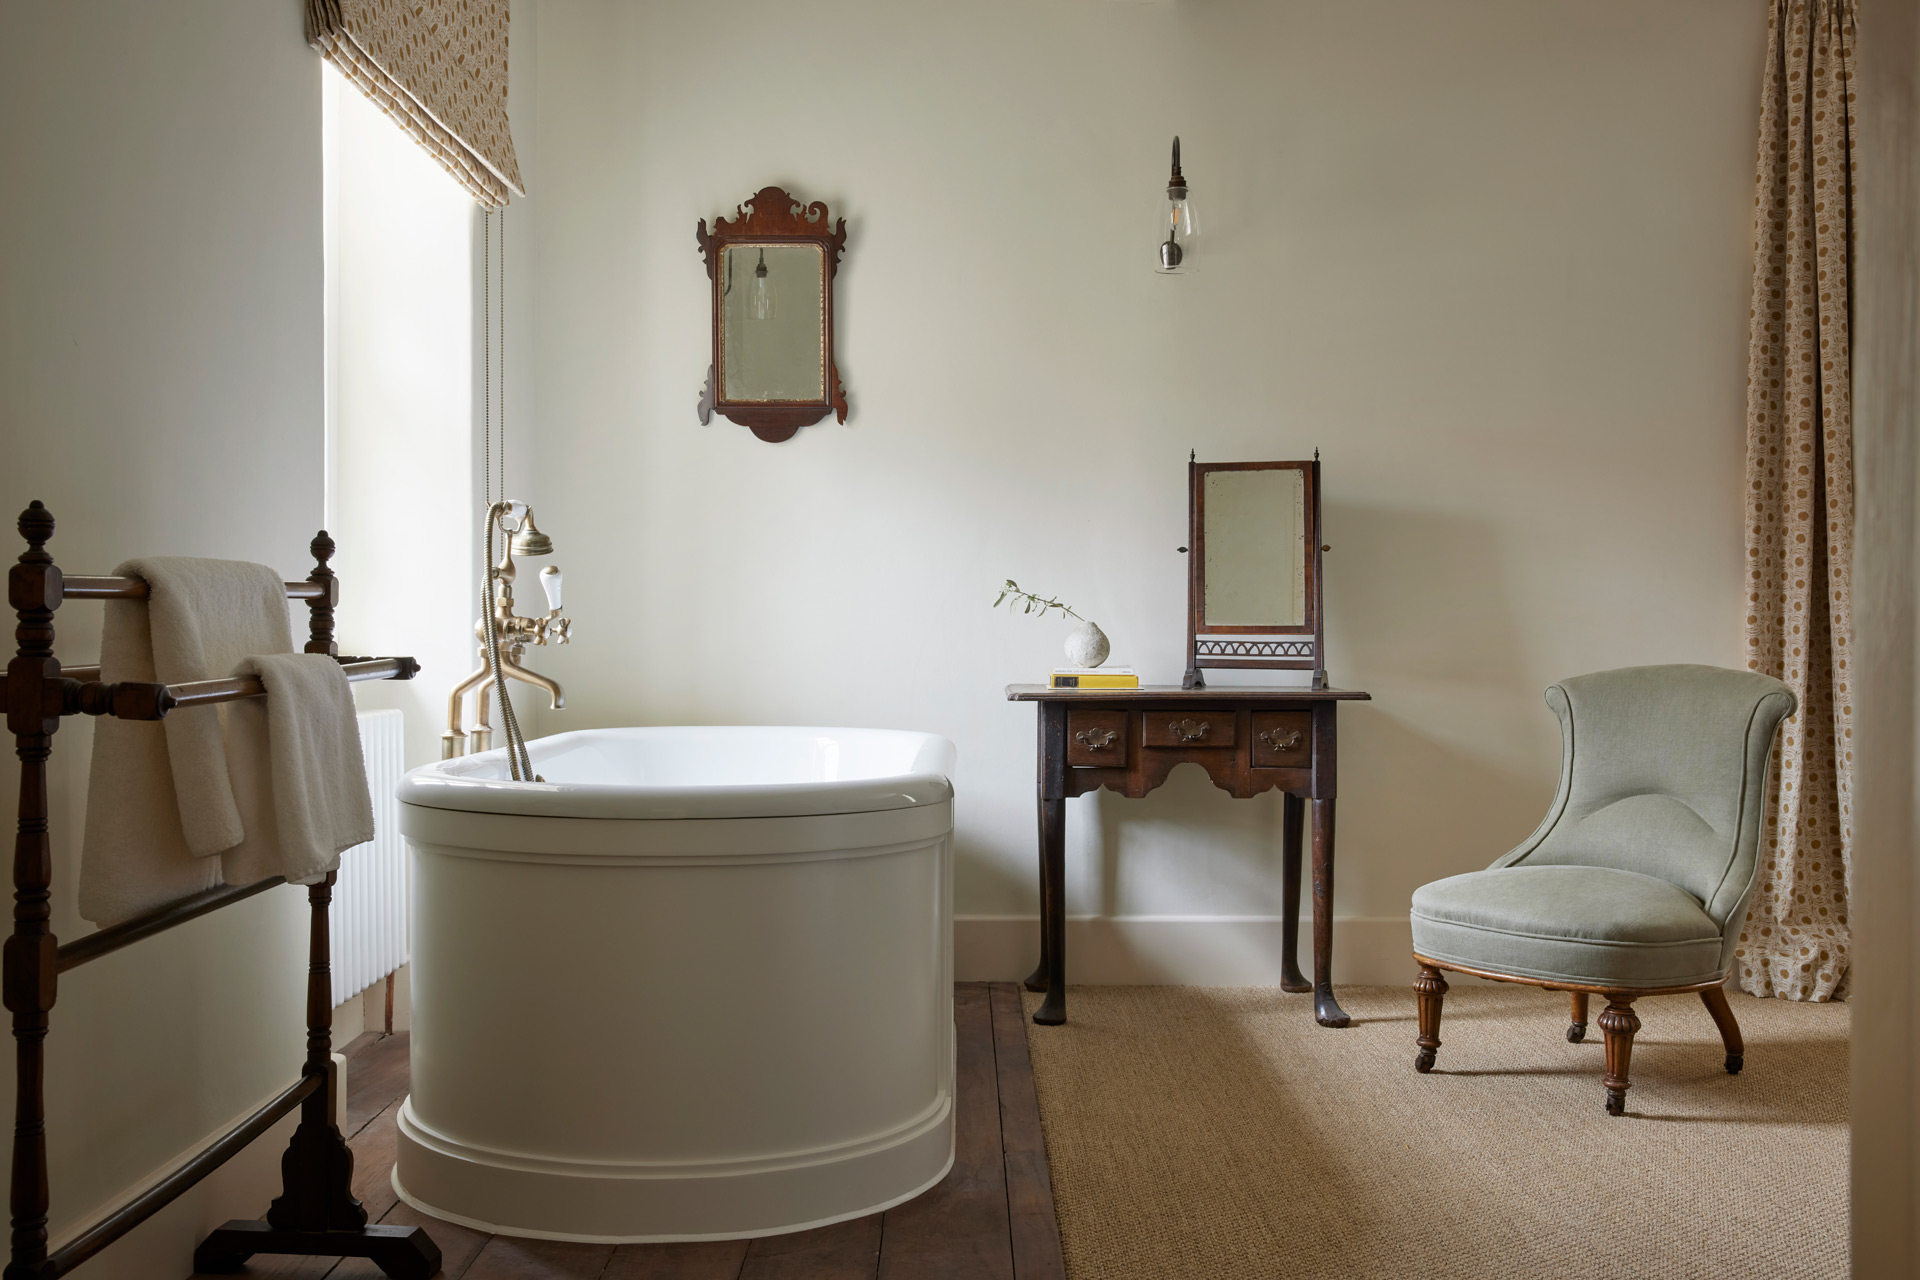 Bathroom with freestanding bath, wooden chair and wood-framed mirror